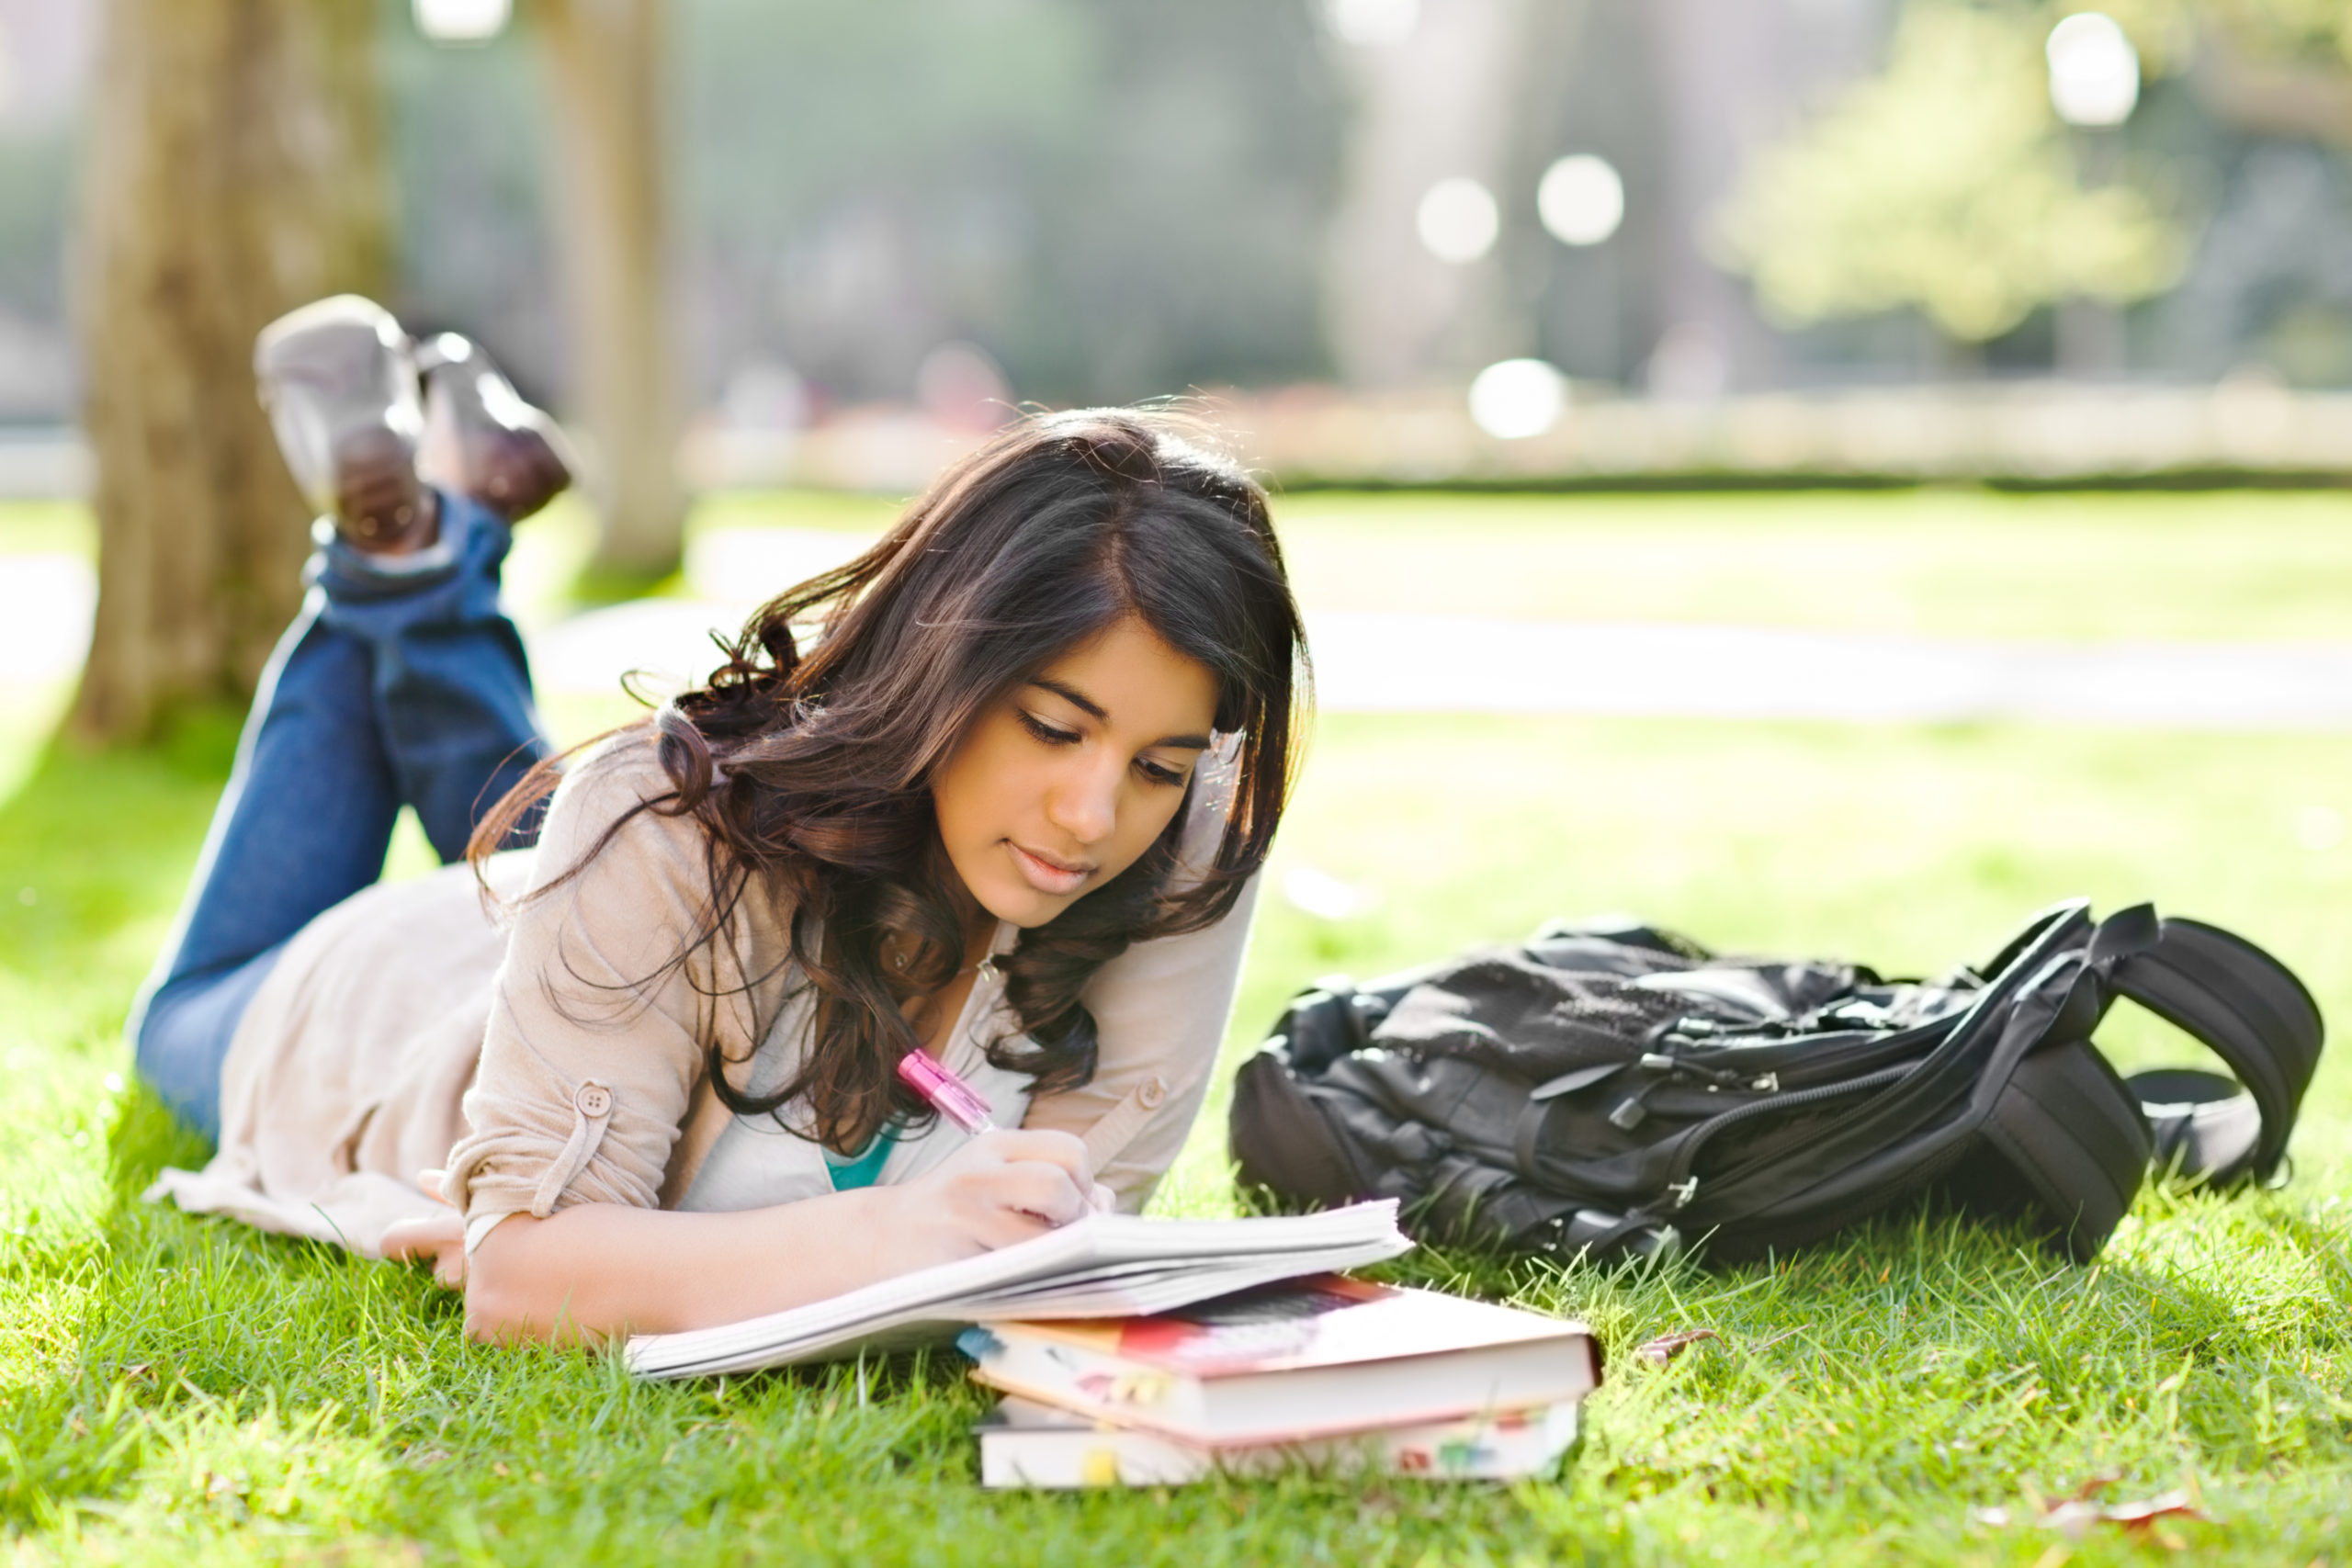 College student studying in grass.